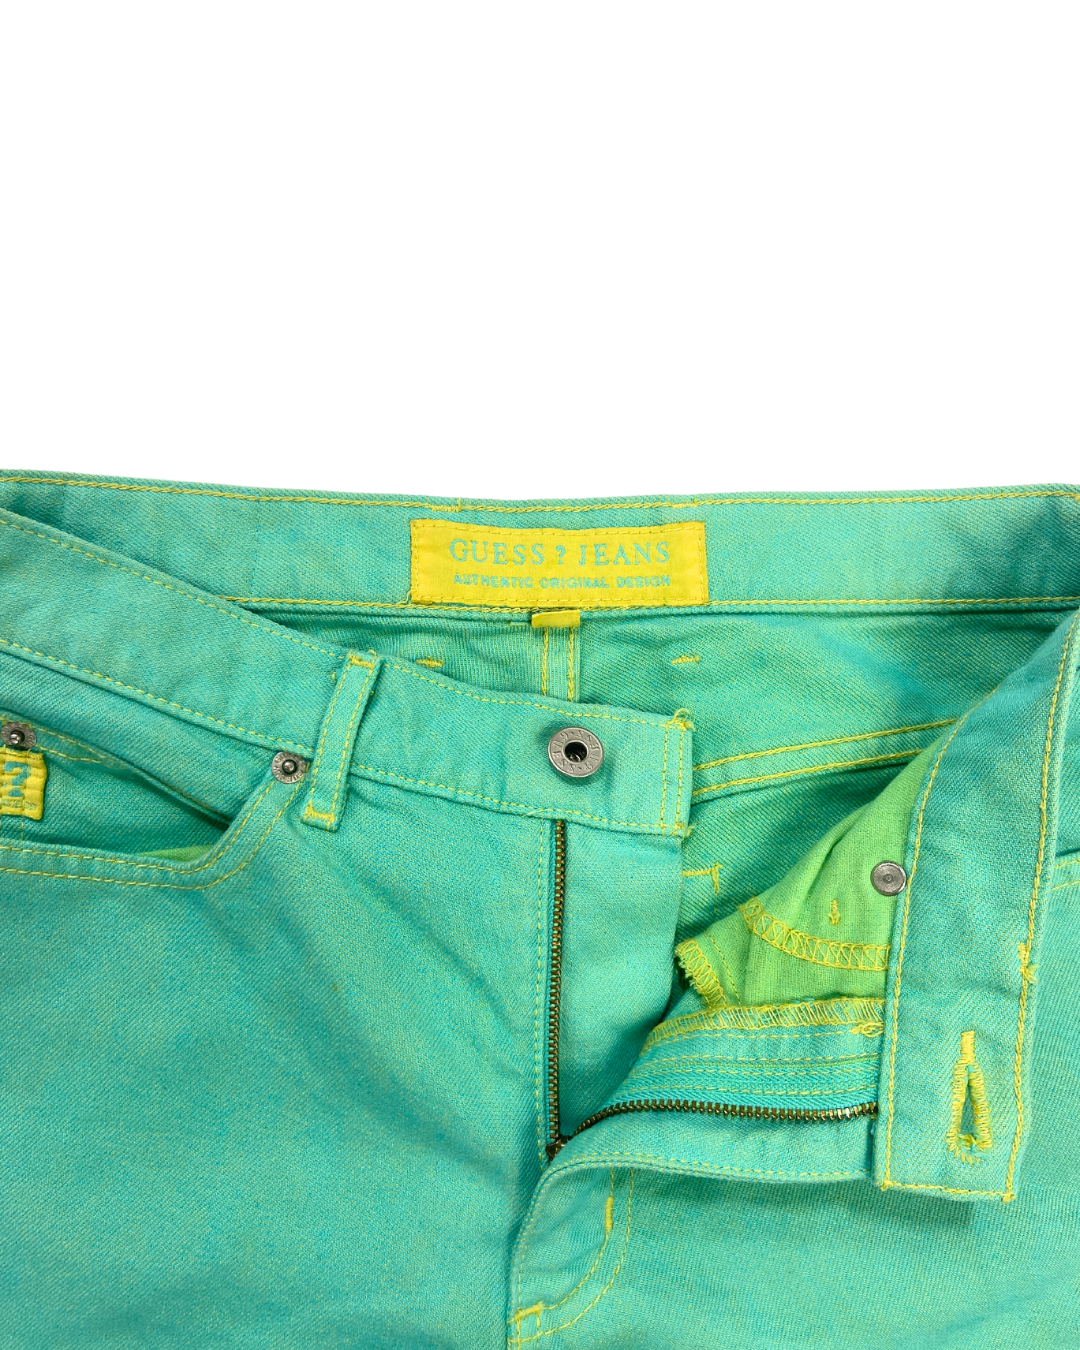 Guess Turquoise Straight Leg Jeans